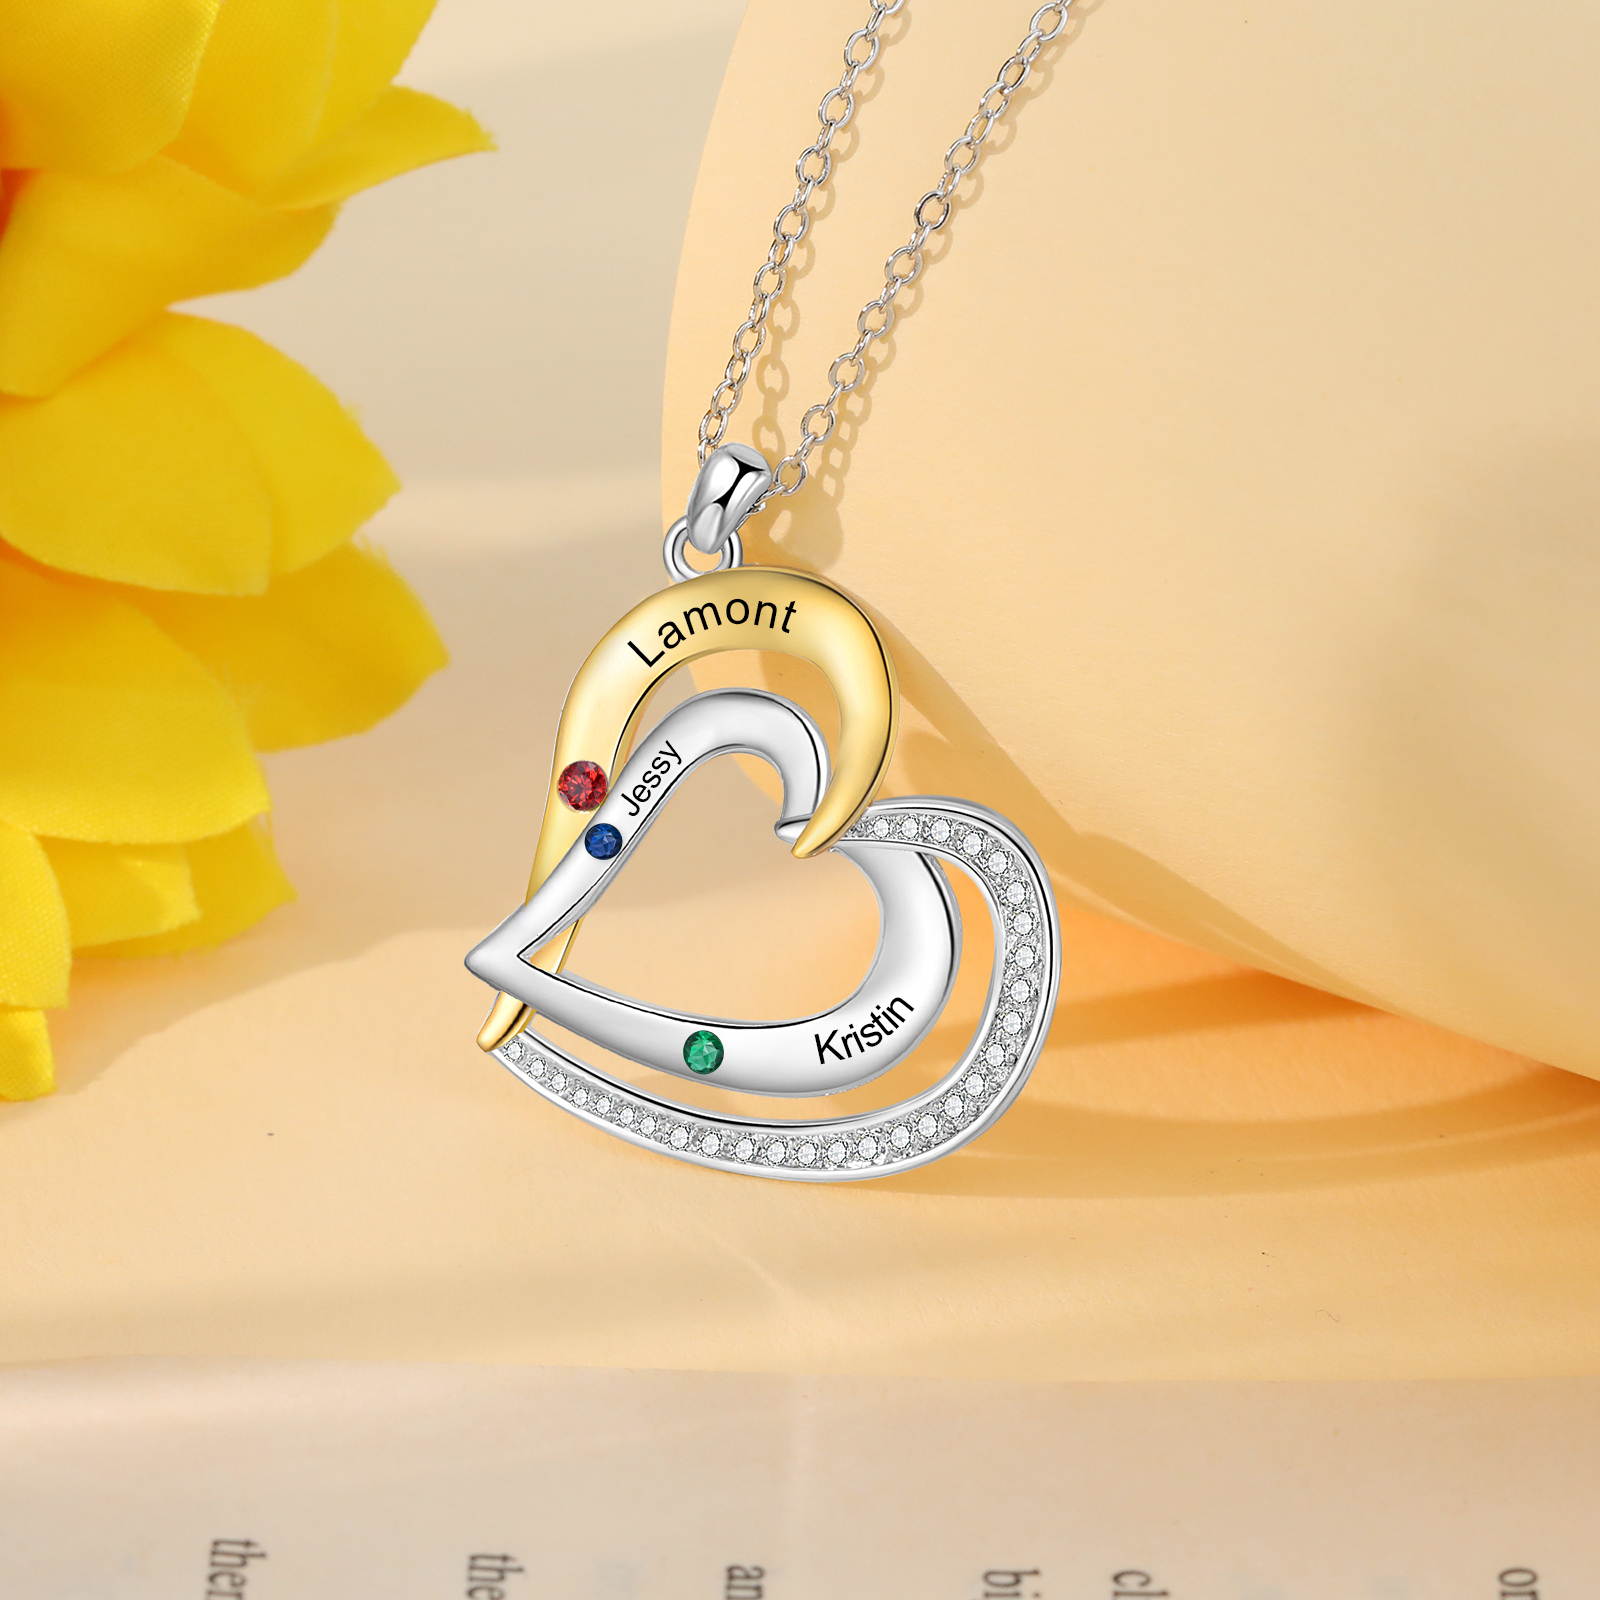 3 Names - Personalized Special Heart Necklace S925 Silver with Birthstone and Name Beautiful Gift for Her